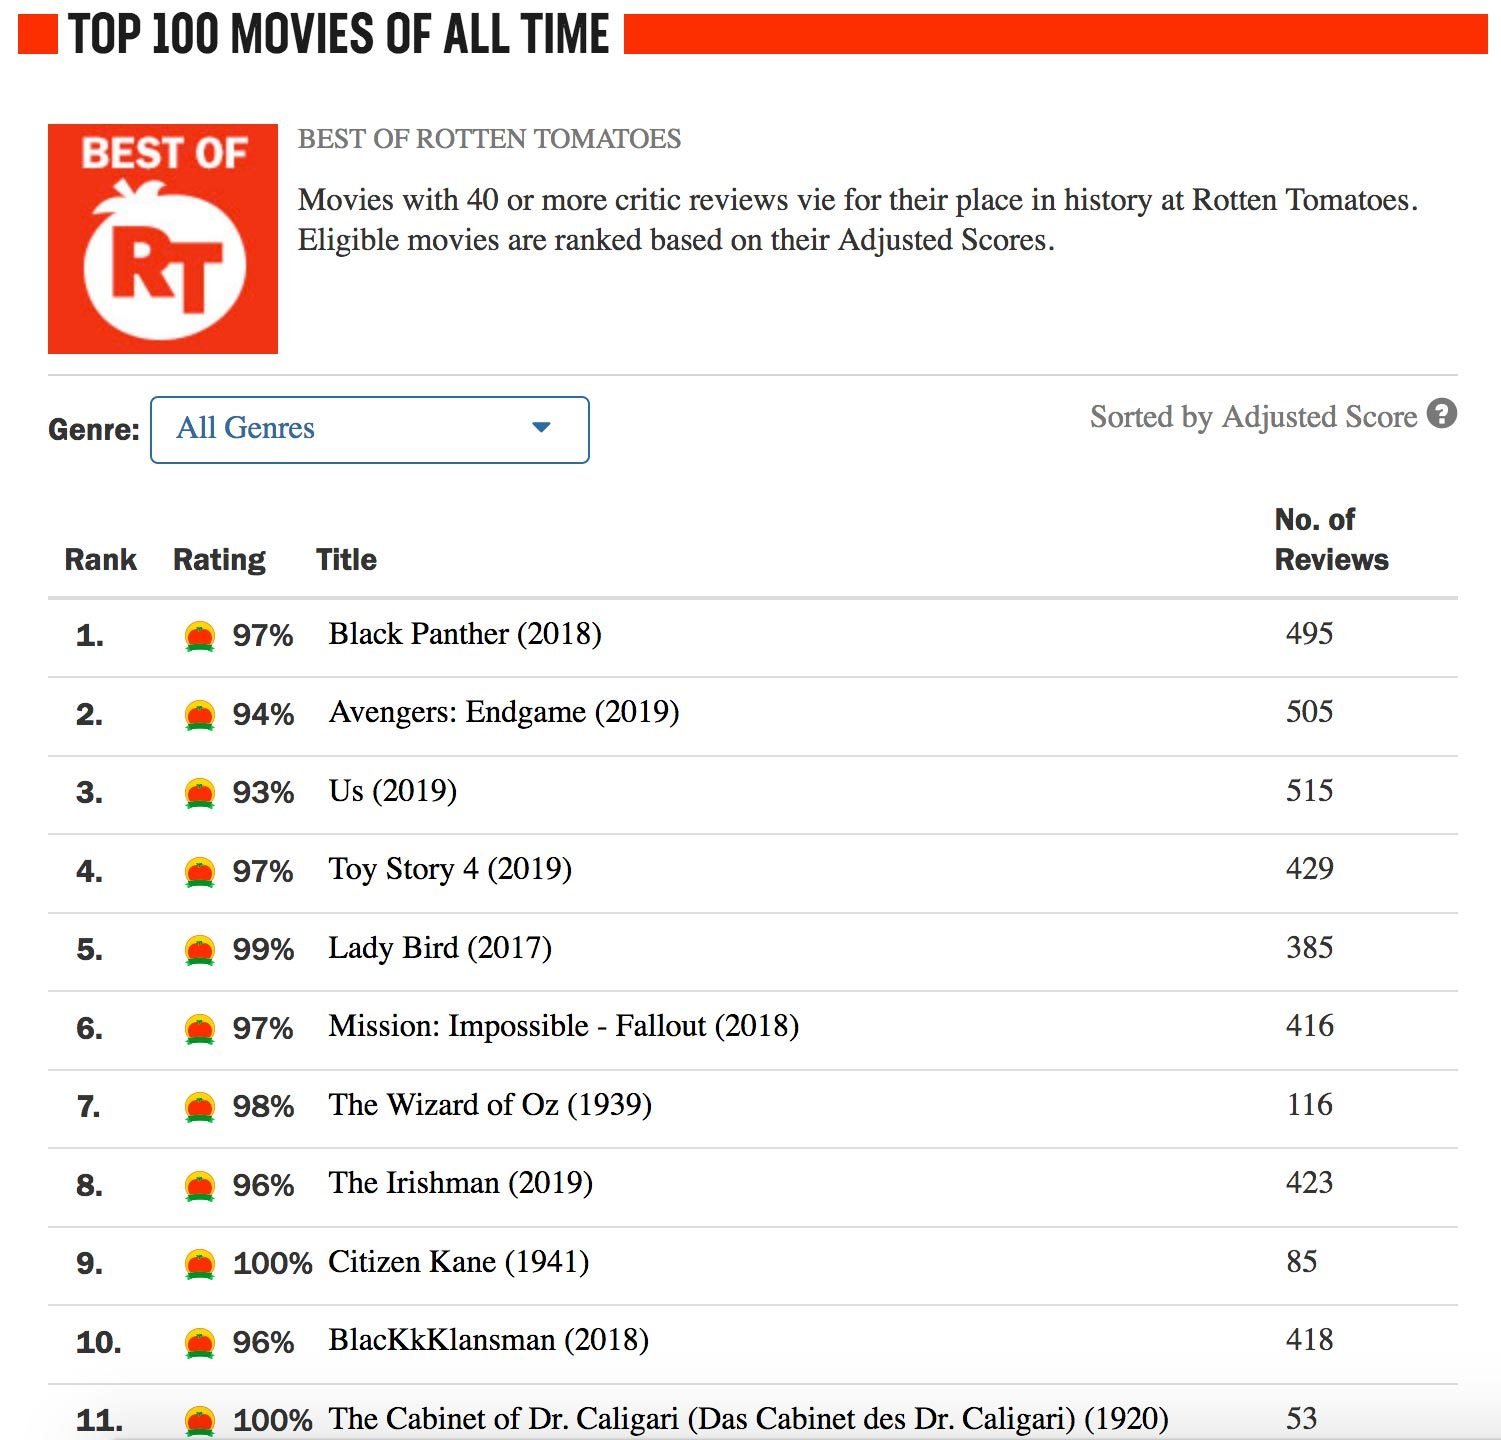 RRR' makes it to Rotten Tomatoes' list of 100 best movies 3 hours